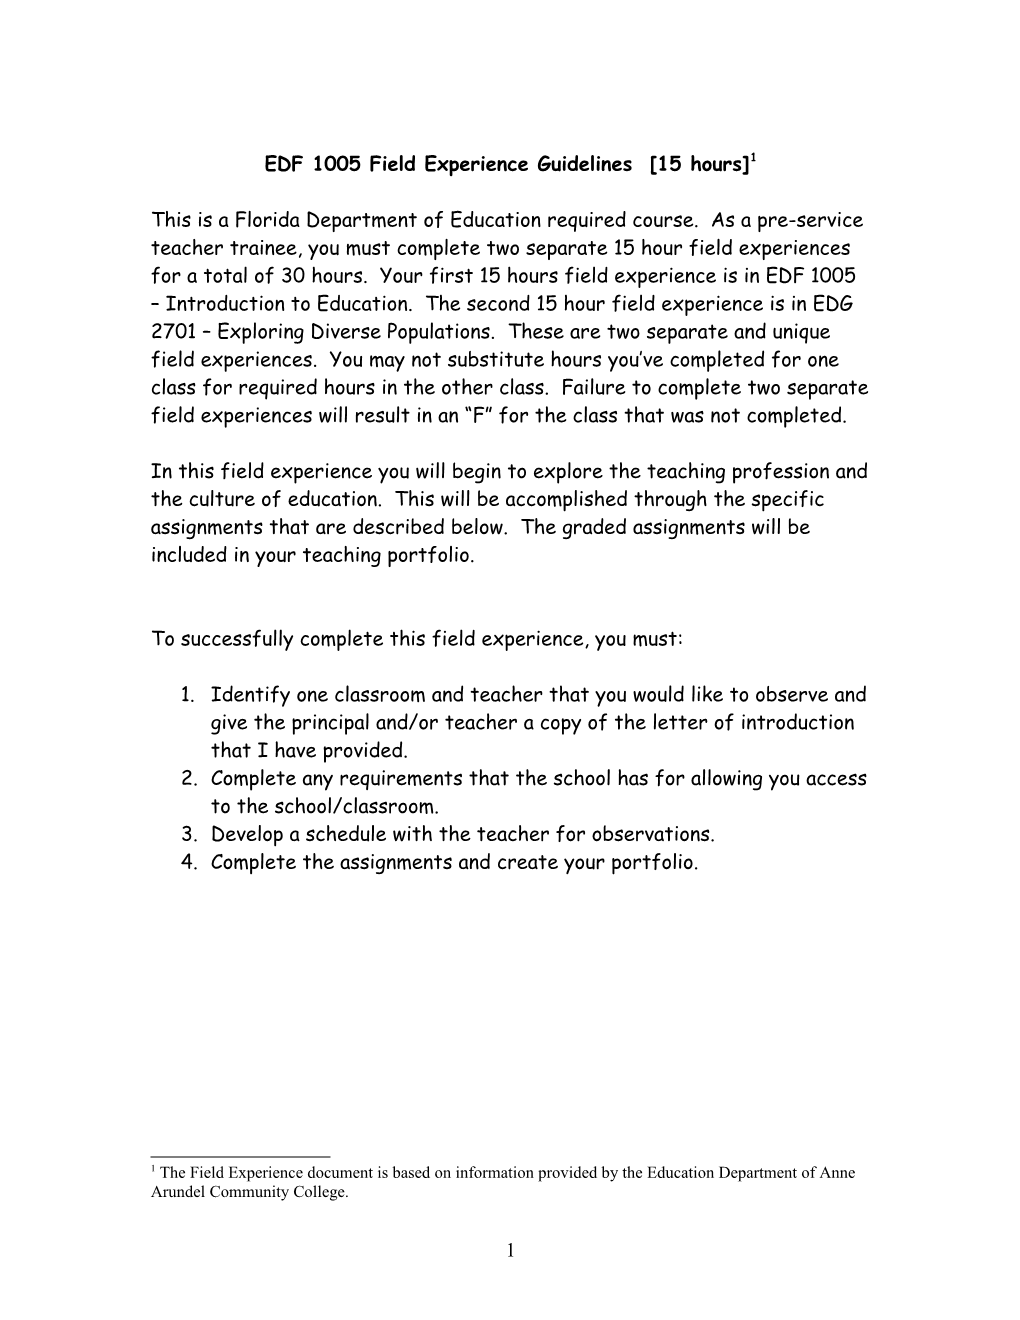 EDF 1005 Field Experience Guidelines 15 Hours